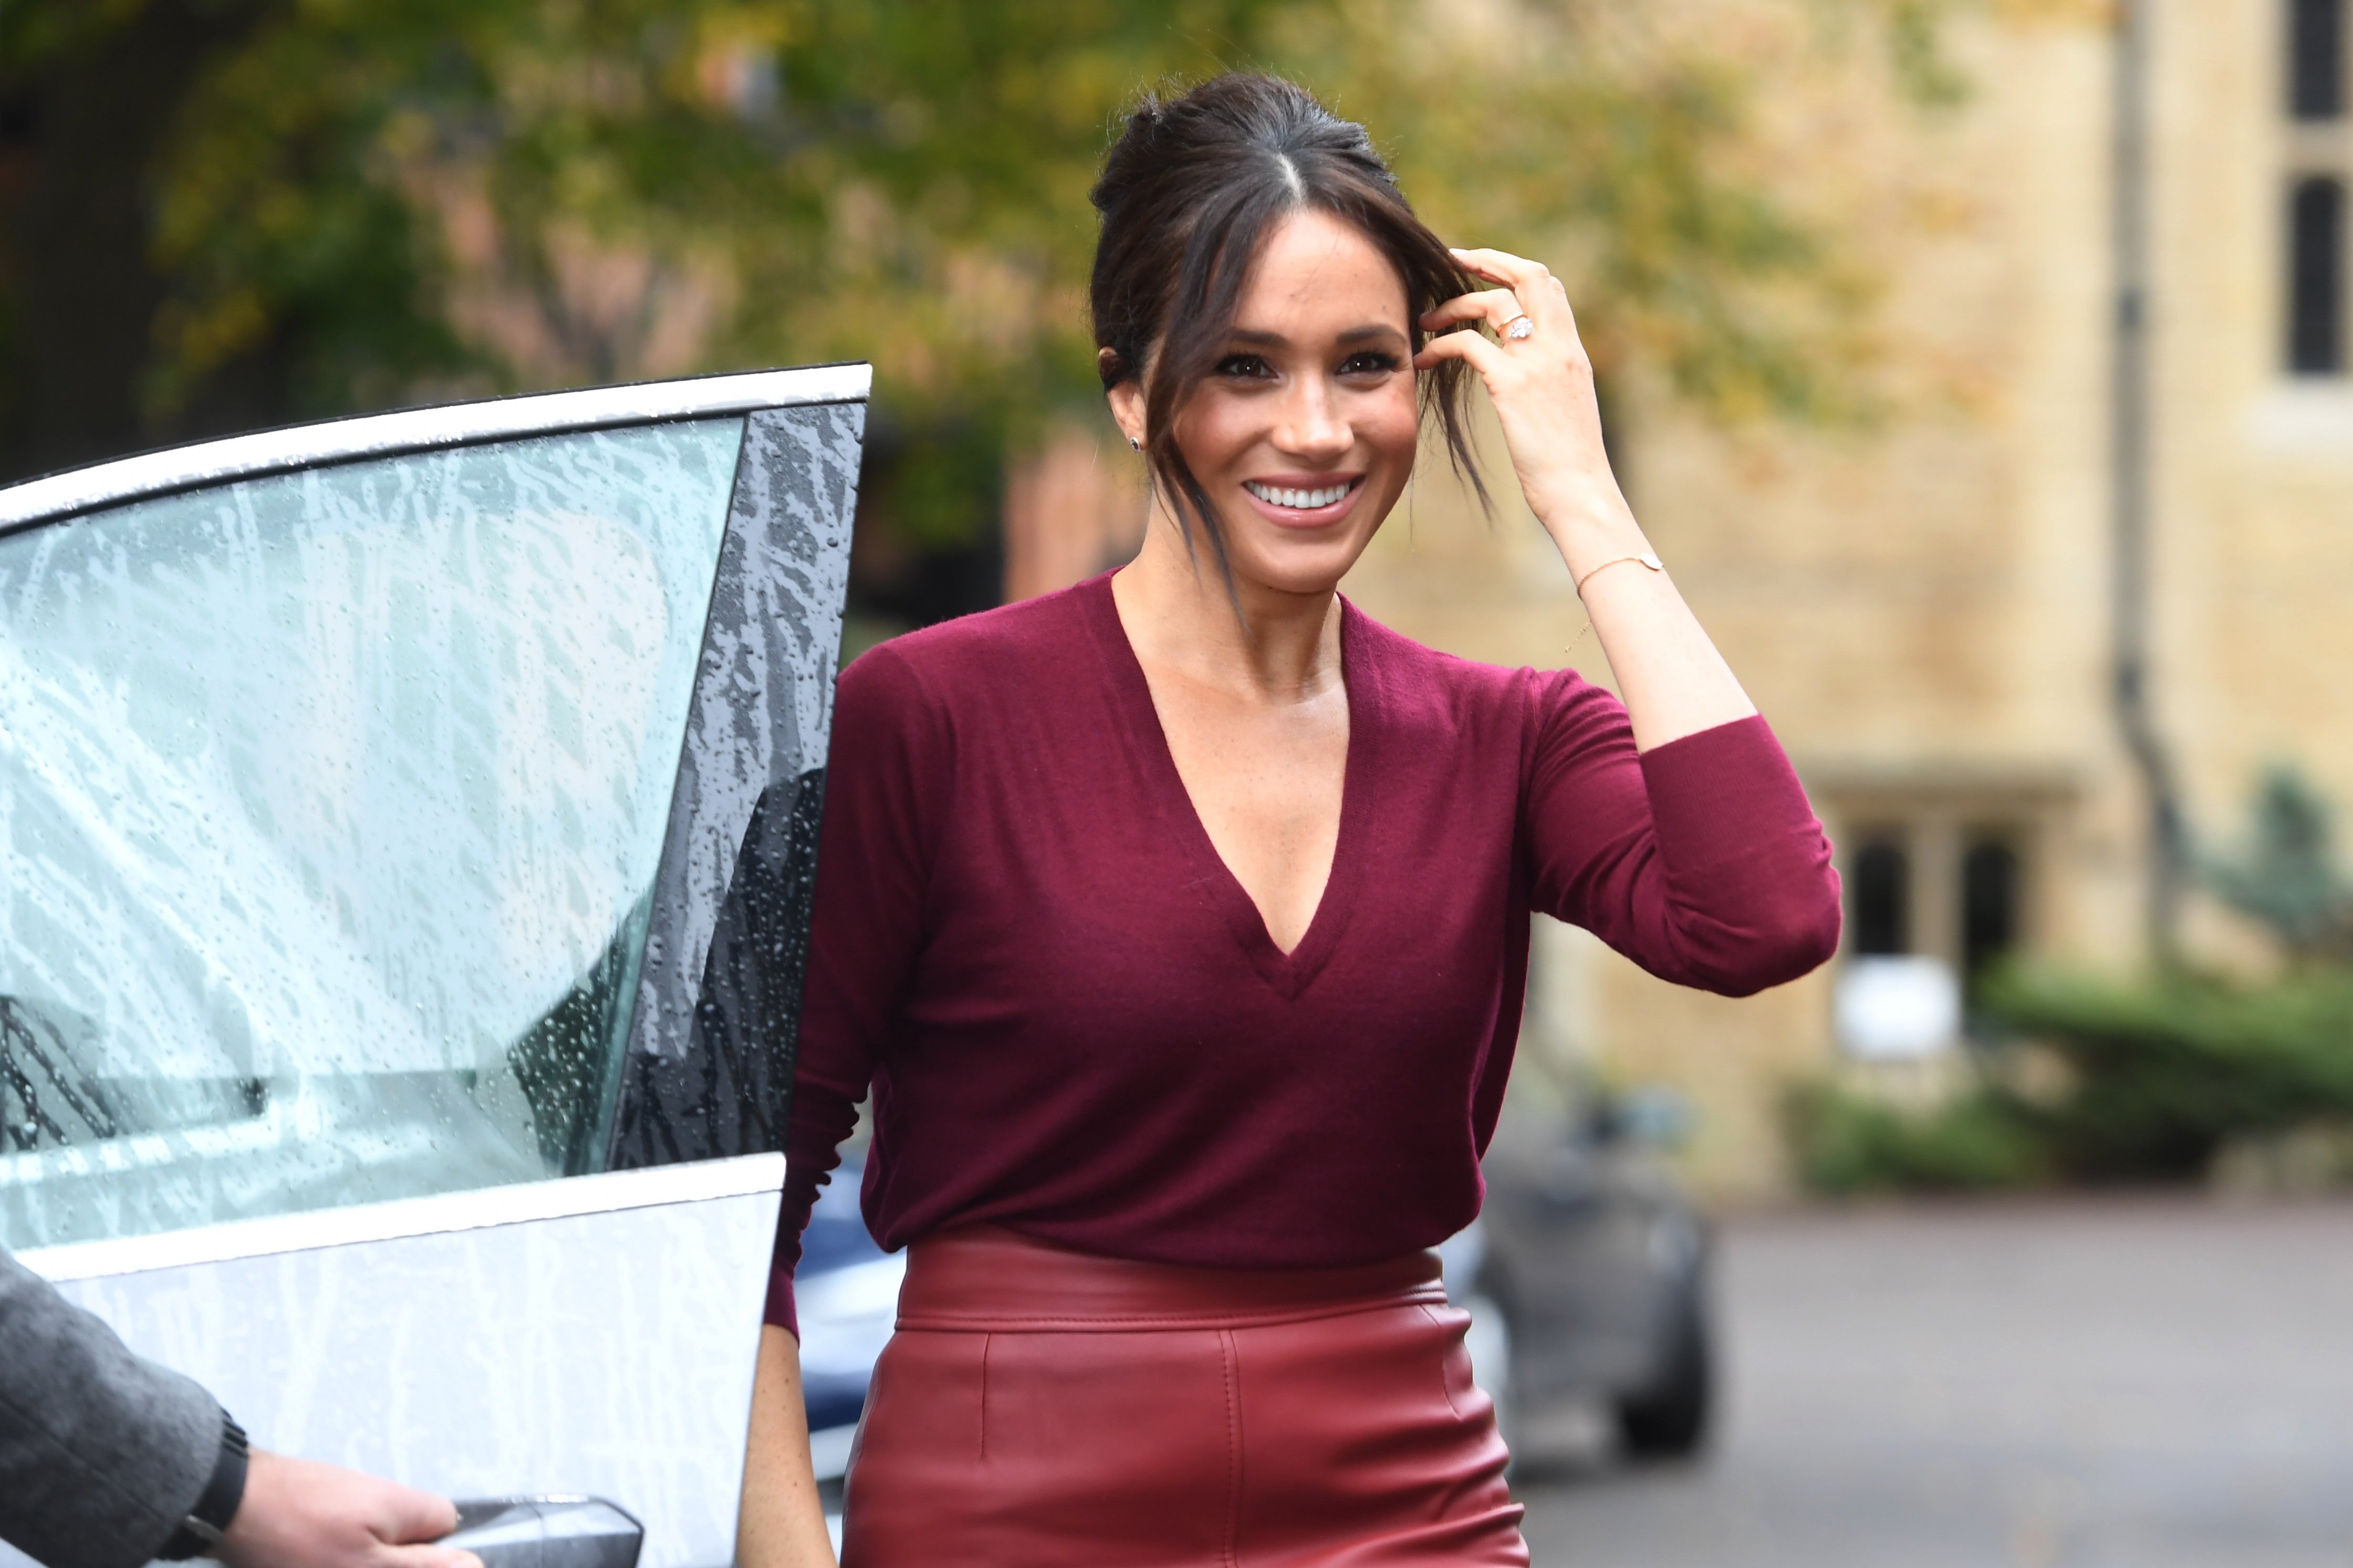 Meghan, Duchess of Sussex attends a roundtable discussion on gender equality with The Queens Commonwealth Trust (QCT) and One Young World at Windsor Castle on October 25, 2019 | Photo: GettyImages